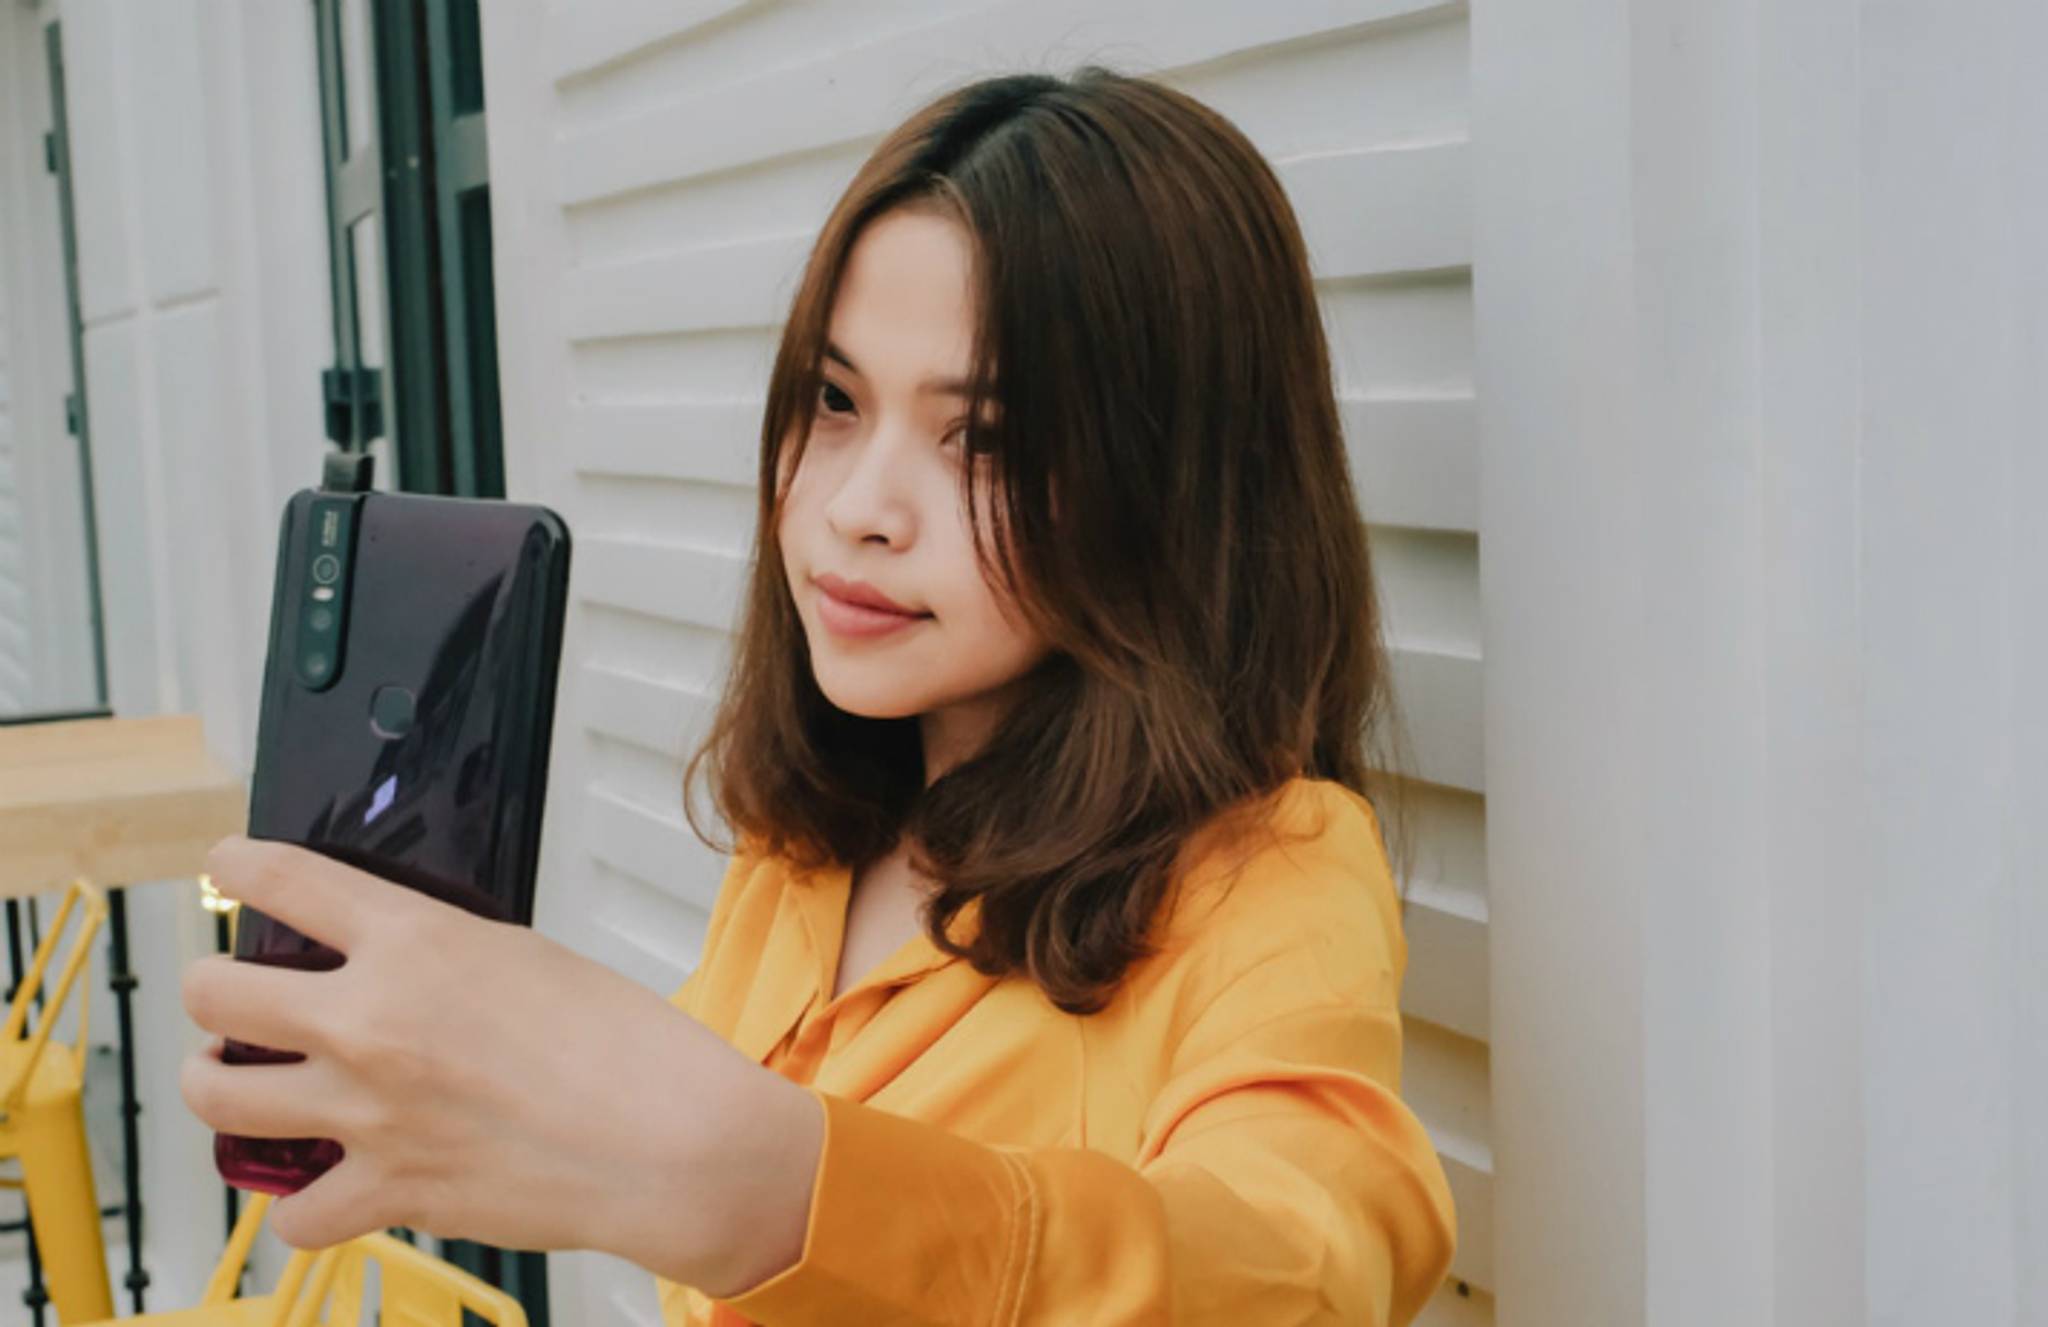 Gen Z are growing tired of Instagram perfectionism